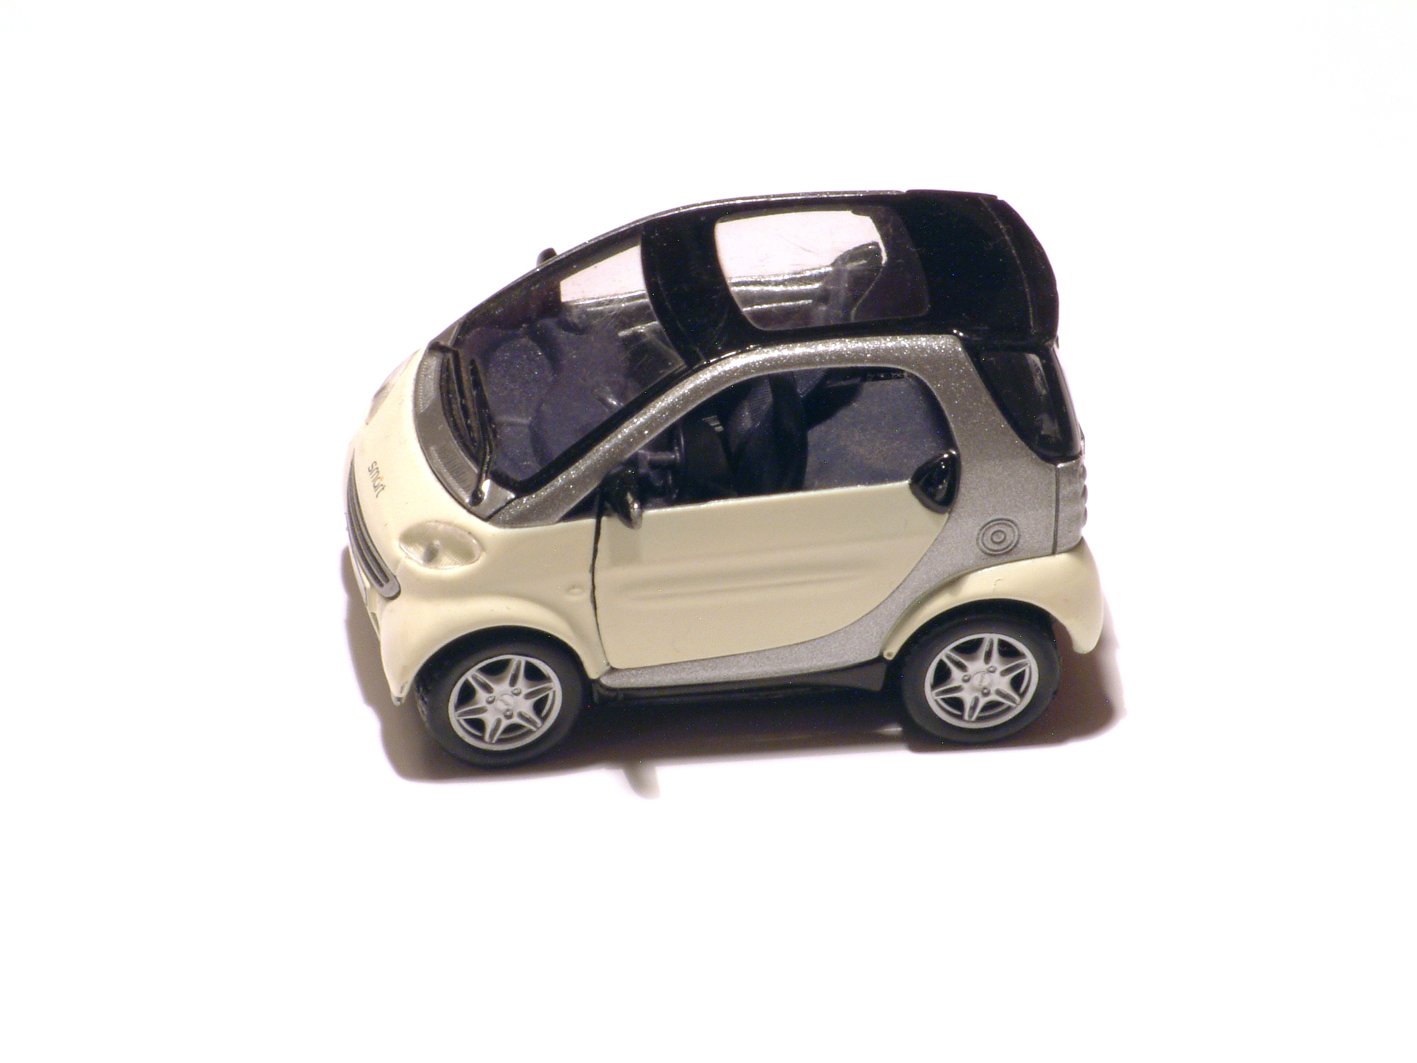 small model car with black and silver top